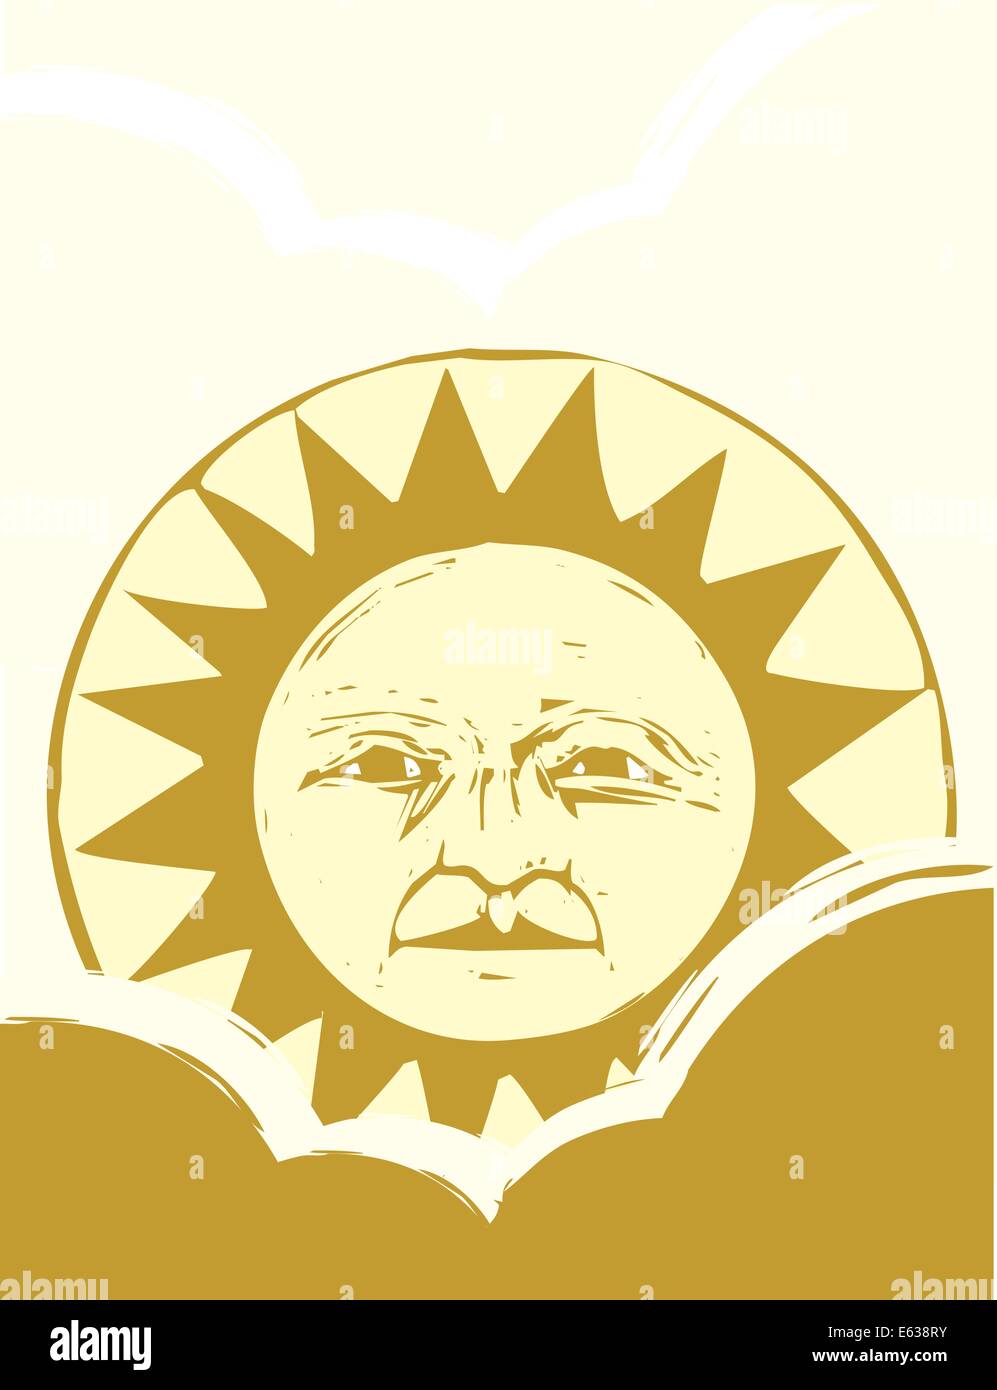 Sun Face and Clouds rendered in a woodcut style Stock Vector